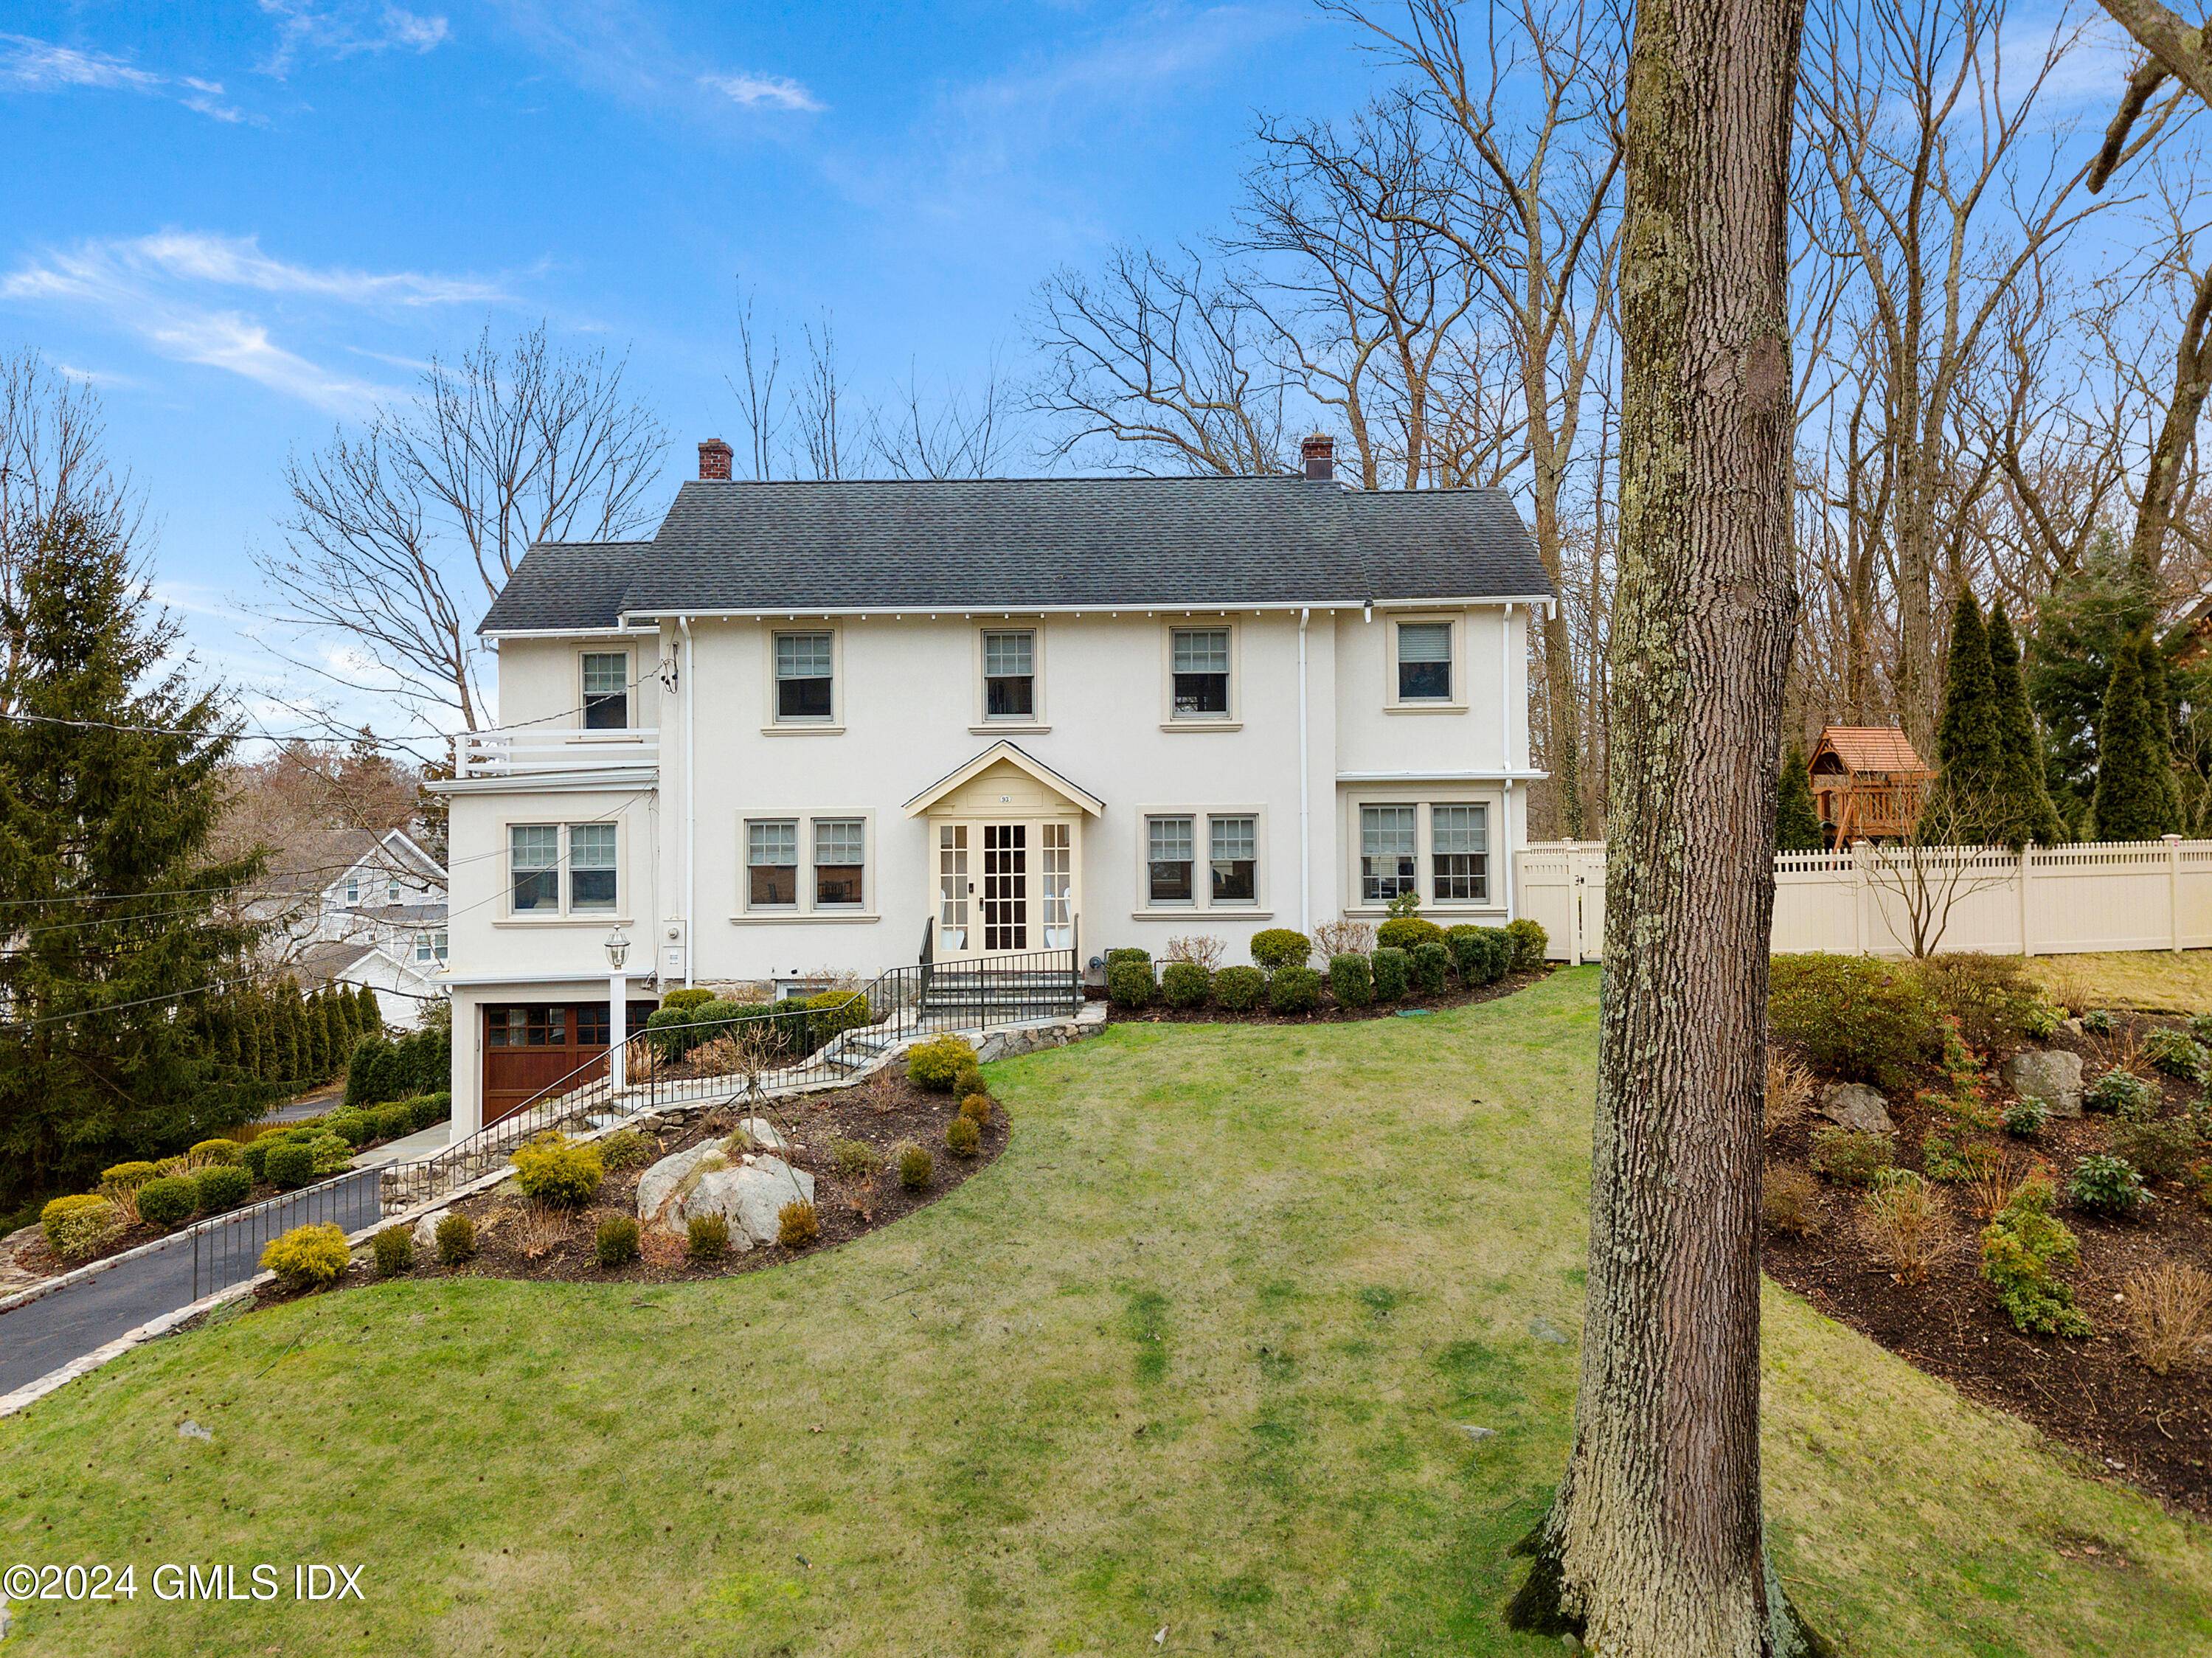 Discover the charm of 93 Valleywood Road, a tastefully renovated single family home in the heart of Cos Cob.